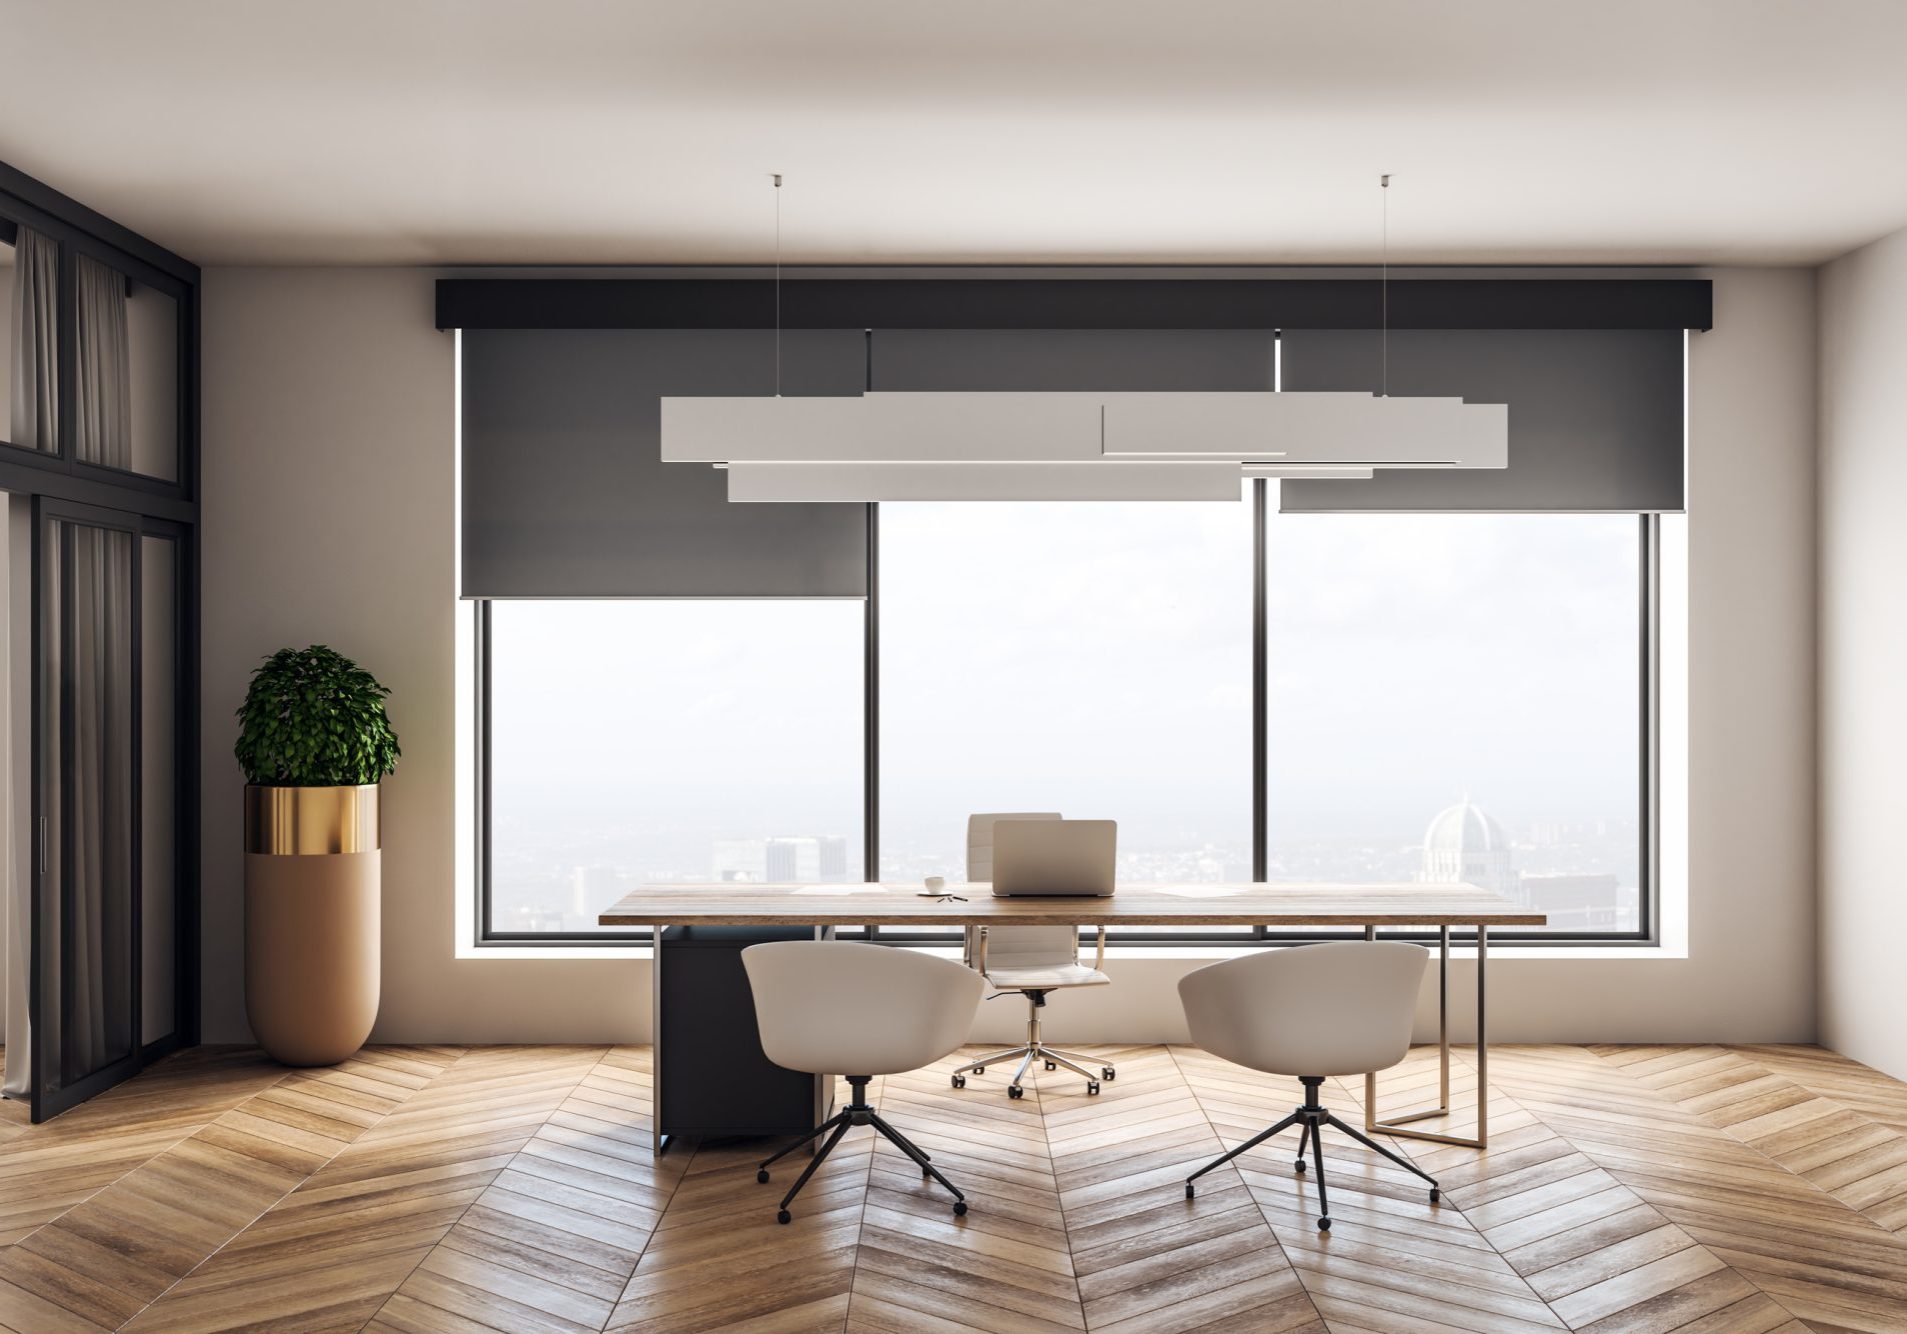 Modern office interior with desktop and chairs, window with city view and daylight, wooden floor and concrete walls. 3D Rendering